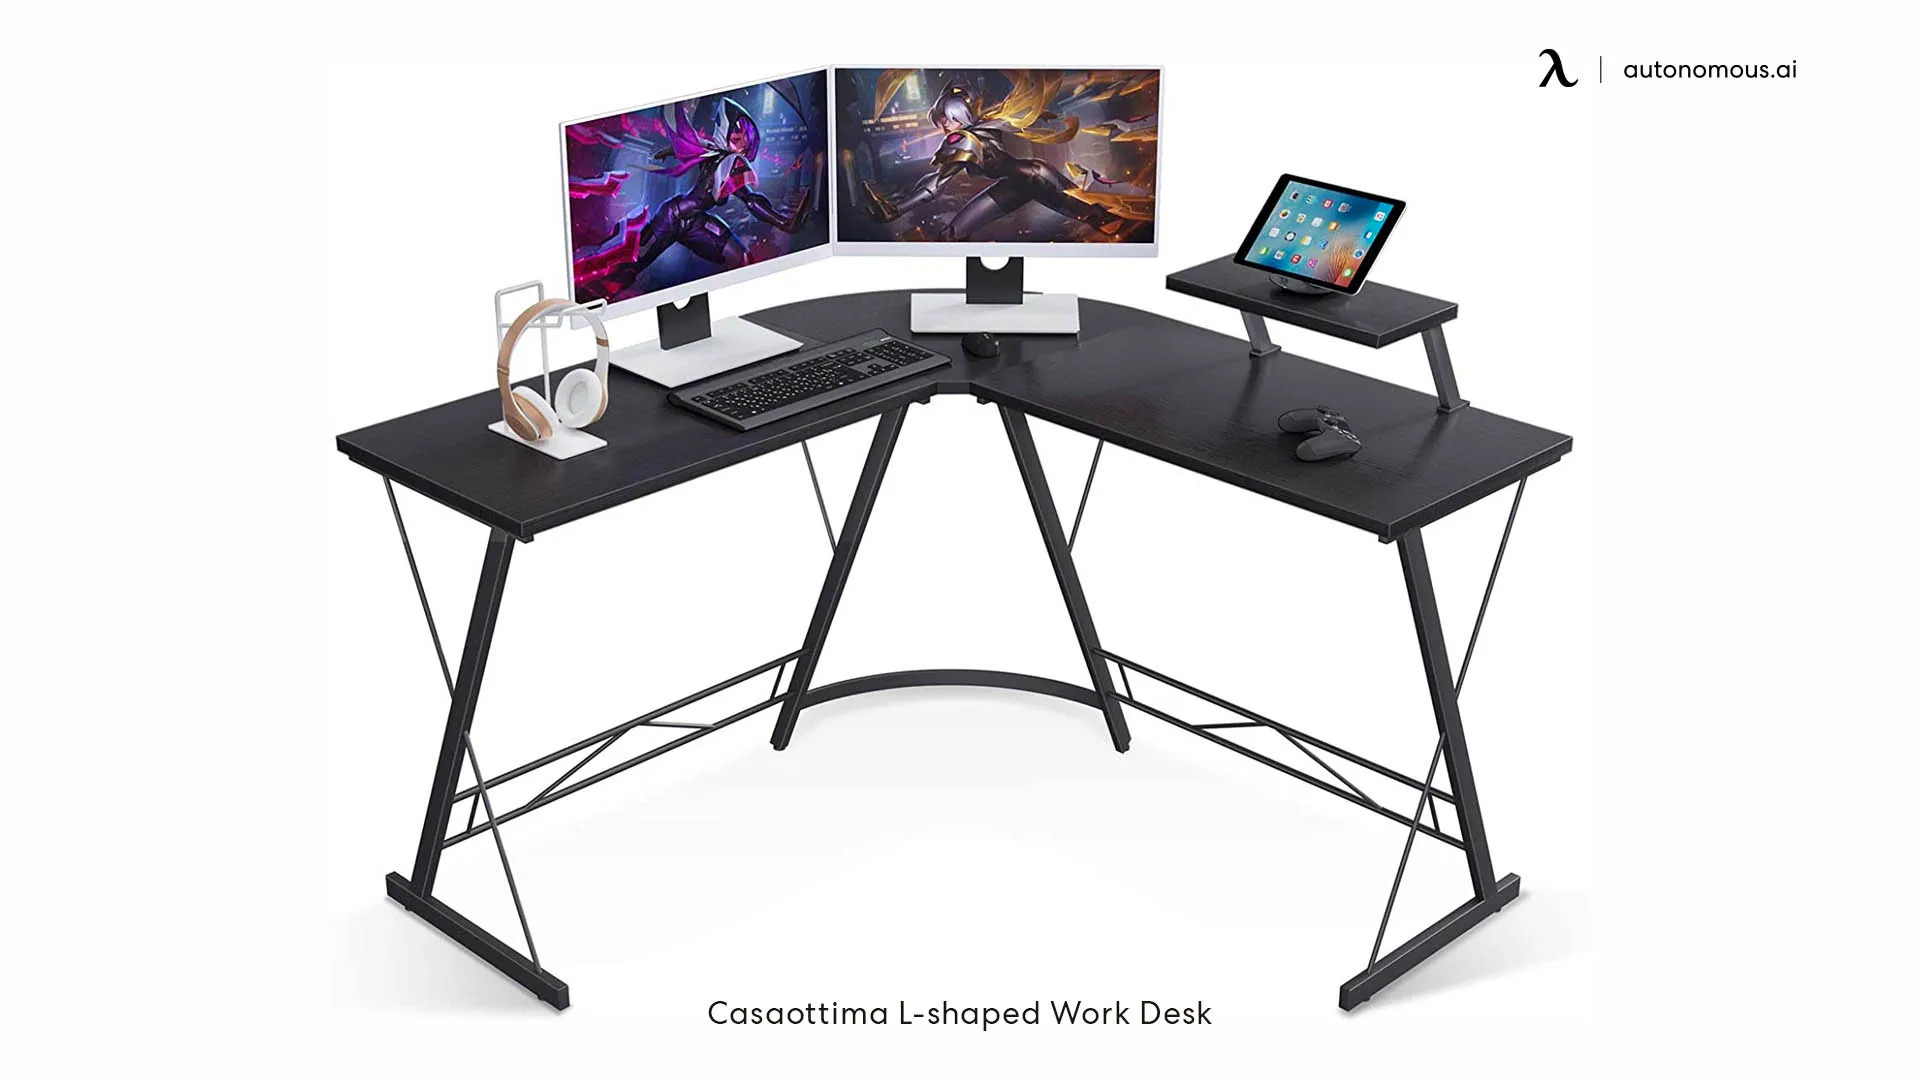 L-shaped Gaming Desk by Casaottima